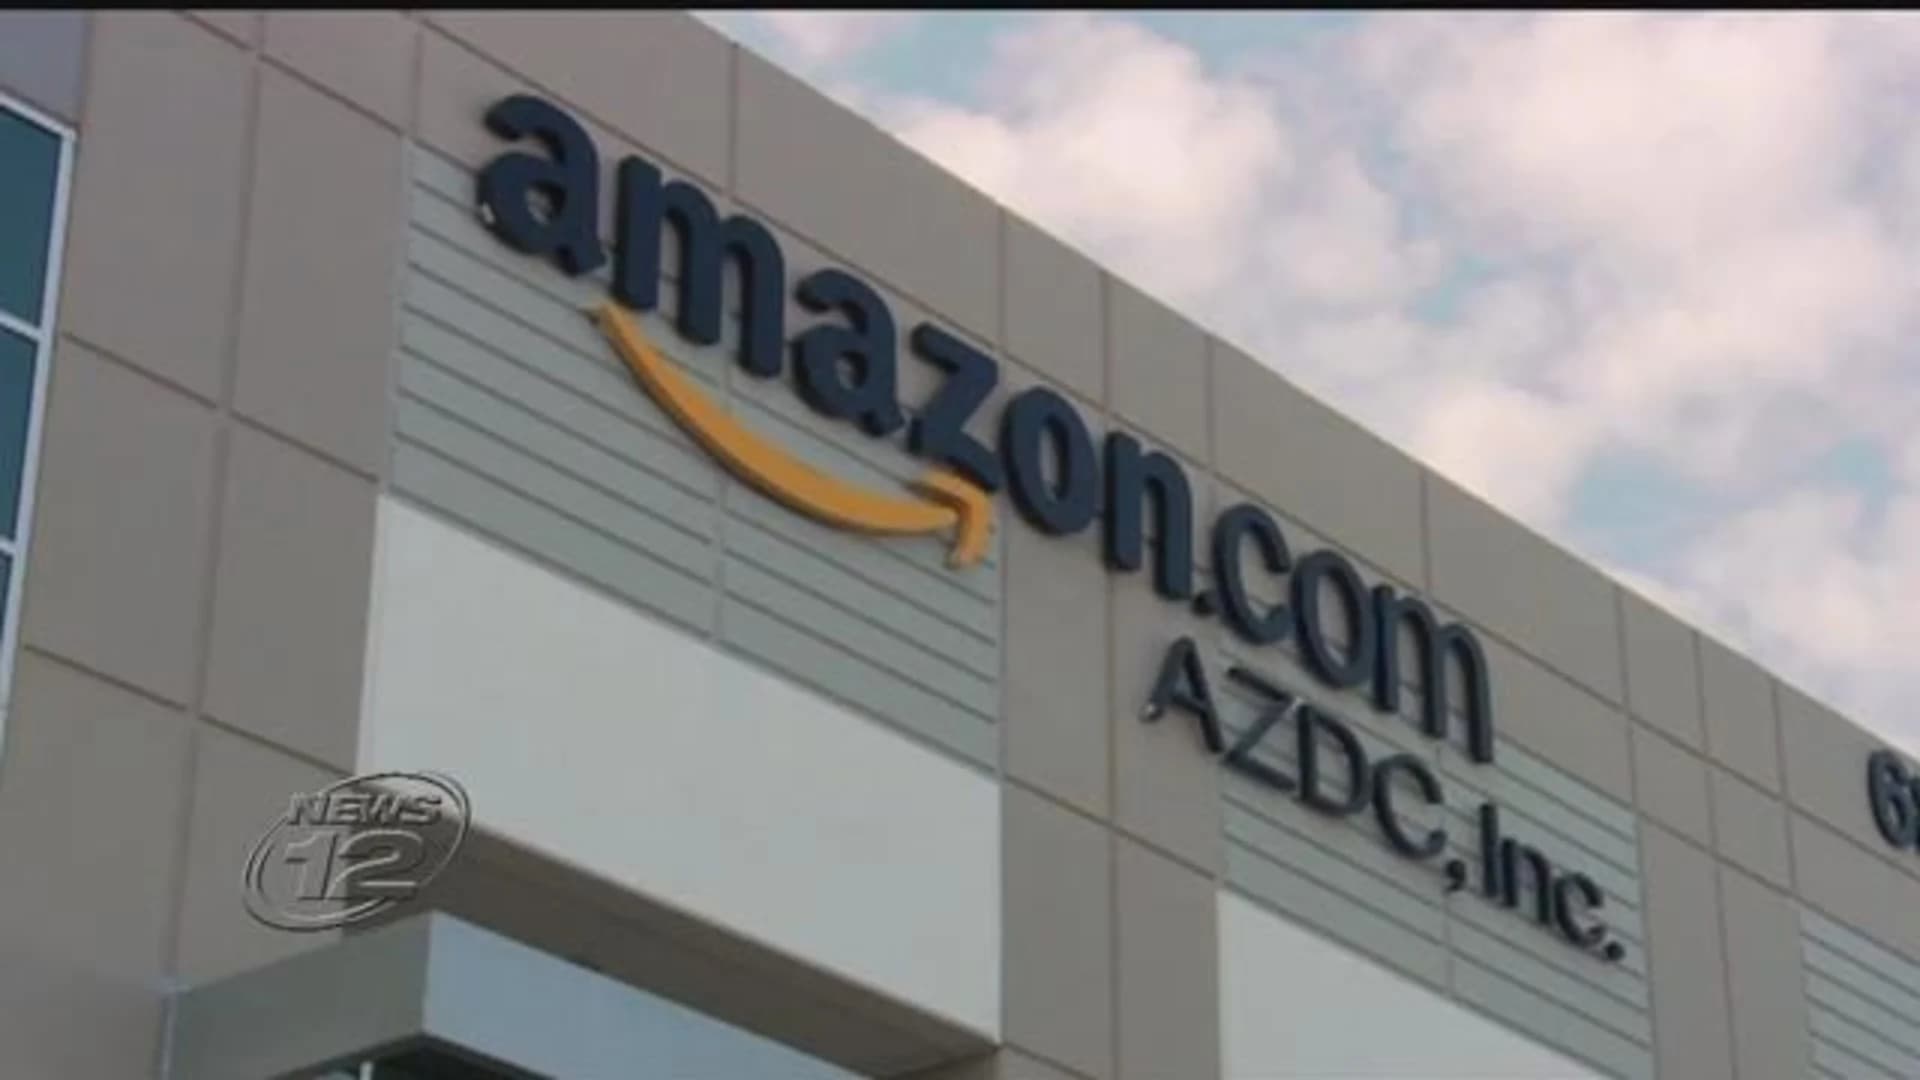 Nassau, Suffolk officials join push for Amazon to build headquarters on LI